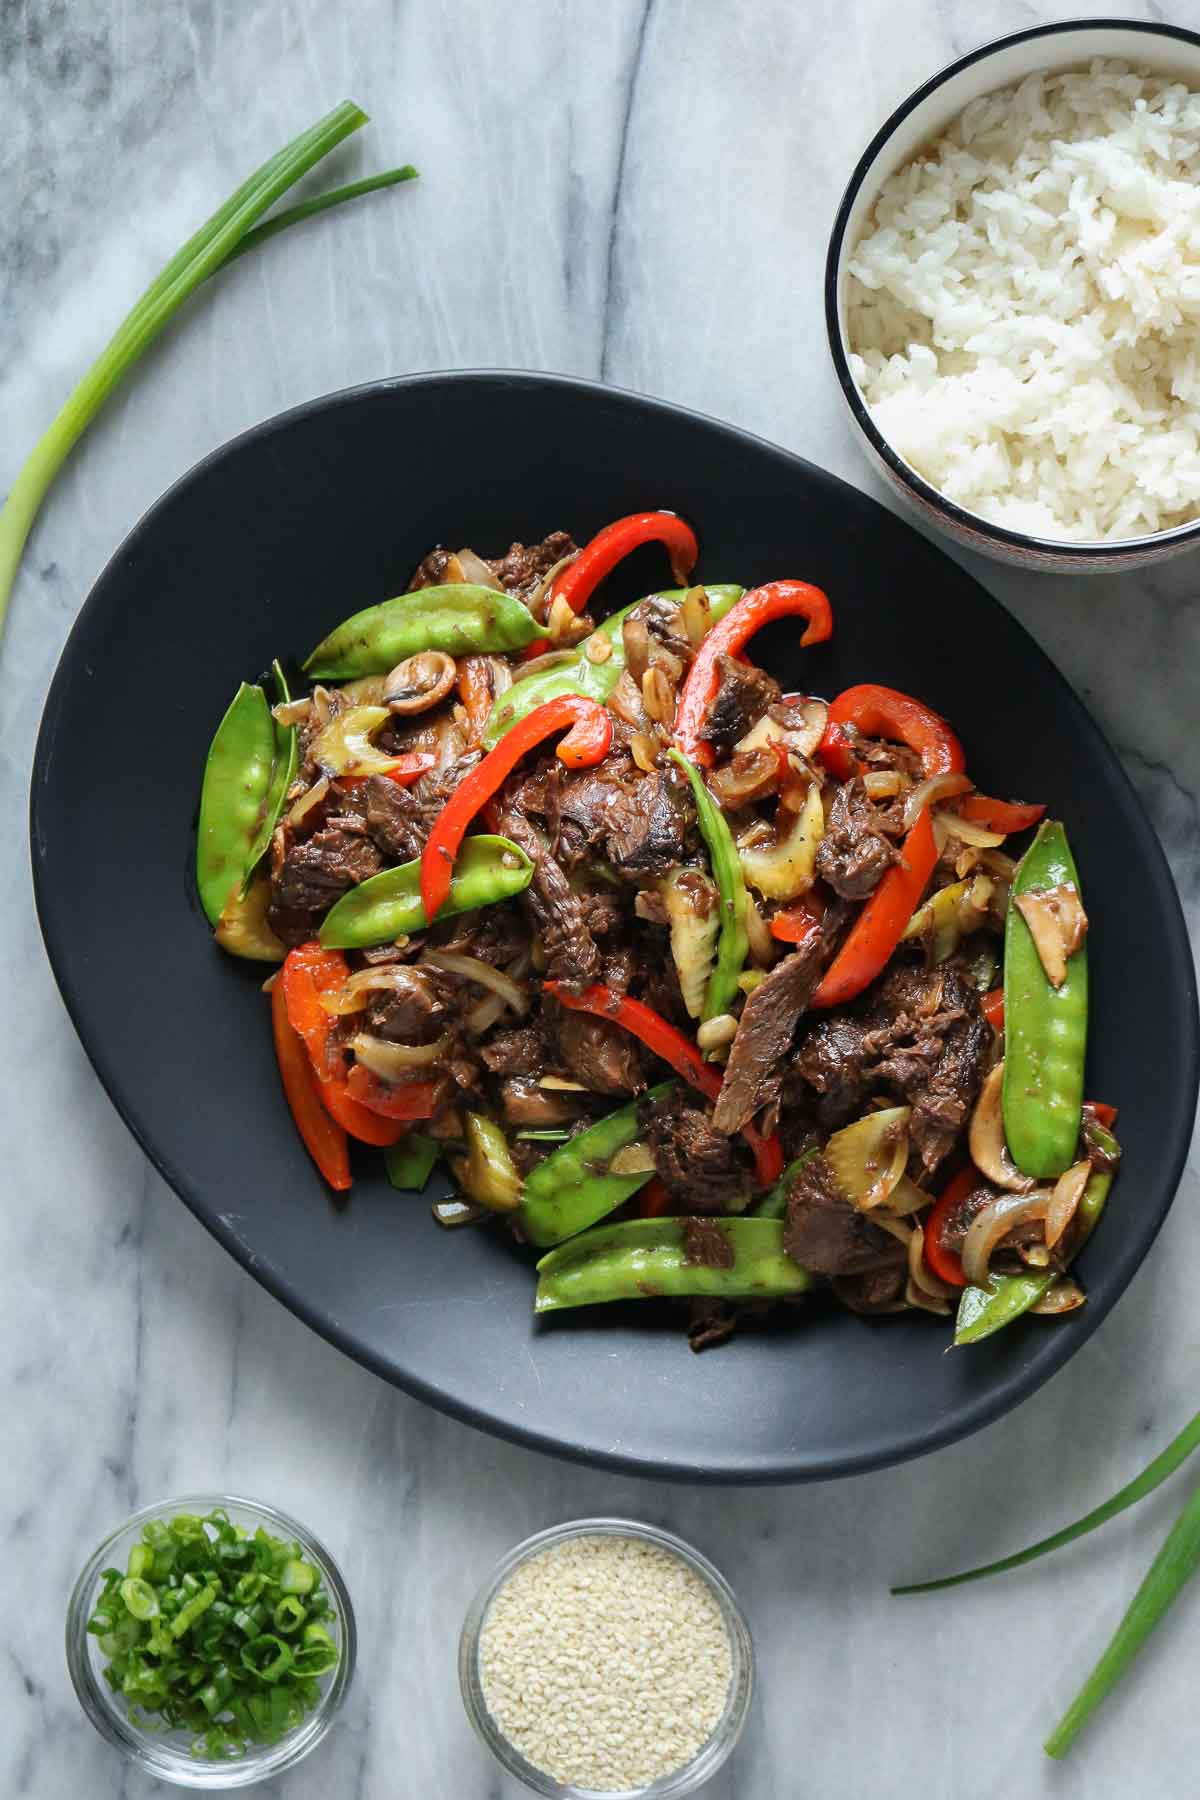 Moose stir-fry on a serving platter next to dishes of rice, green onion and sesame seeds.